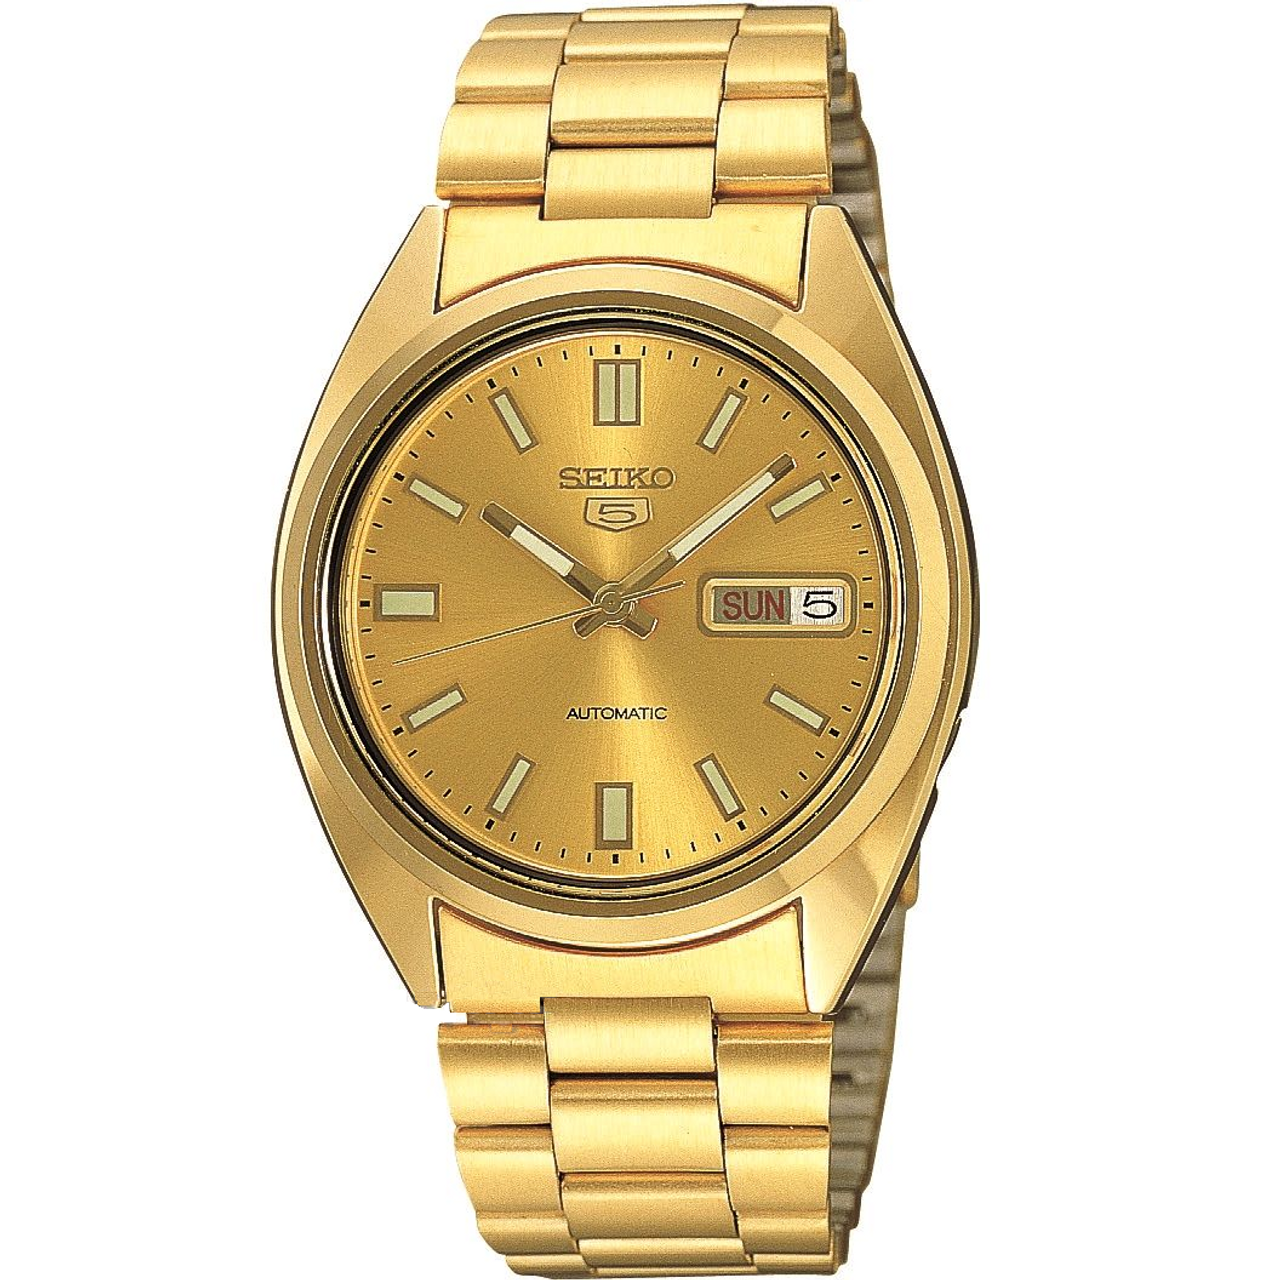 Seiko 5 Men's Automatic Gold Dial Stainless Steel Watch SNXS80